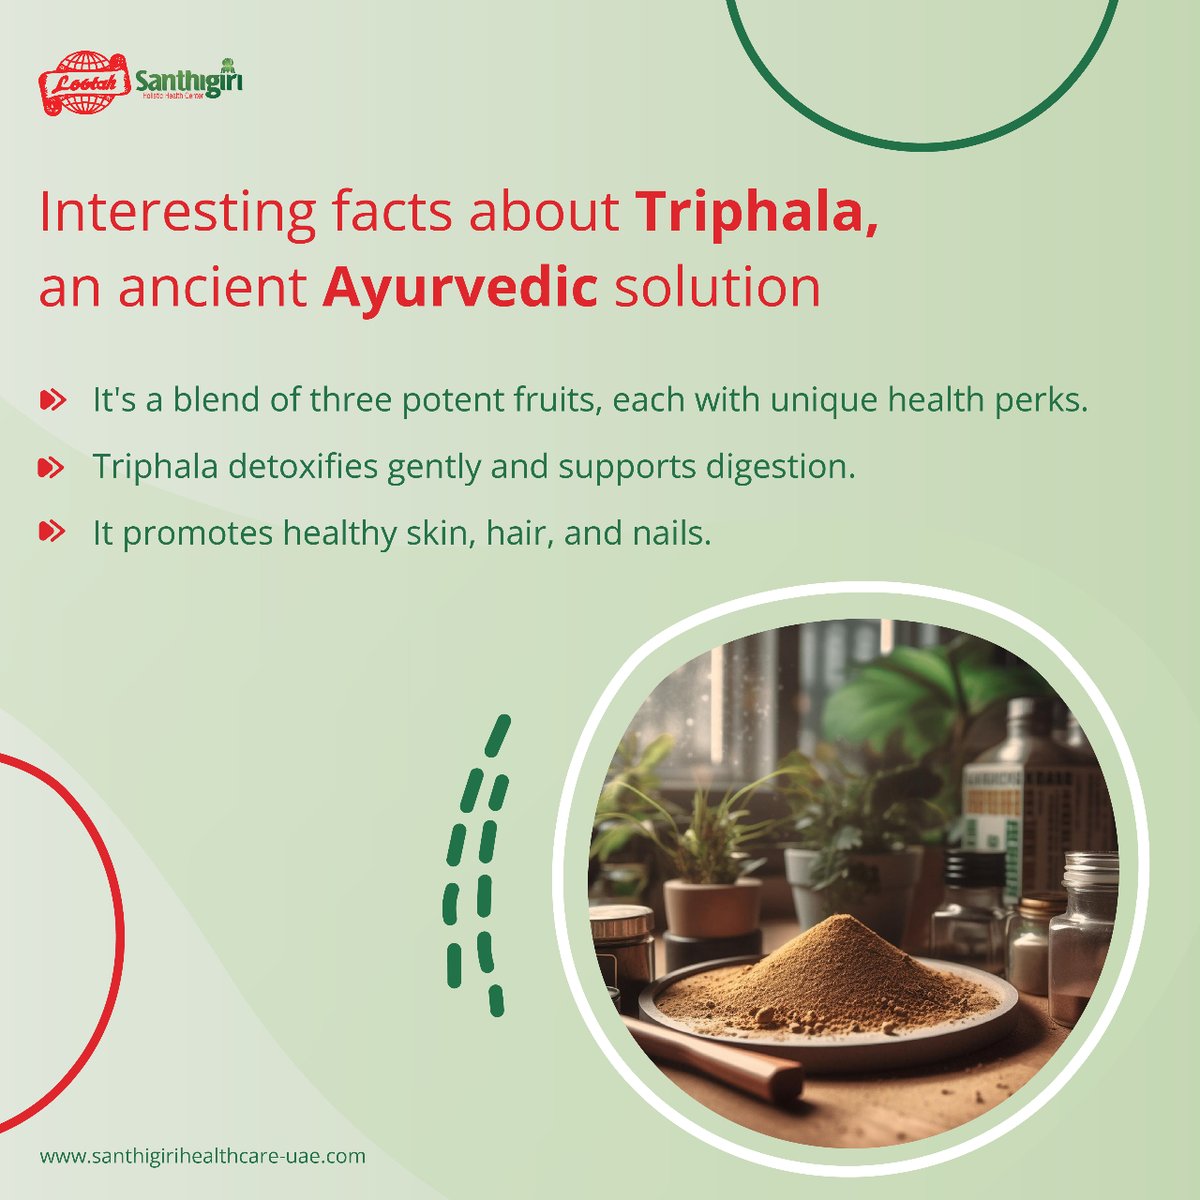 Explore the ancient wisdom of Triphala, a powerful Ayurvedic remedy blending three unique fruits. Triphala has stood the test of time and is now garnering modern scientific interest for its holistic health benefits.

#triphala #ayurvedicwisdom #holistichealth #ancientremedy #uae